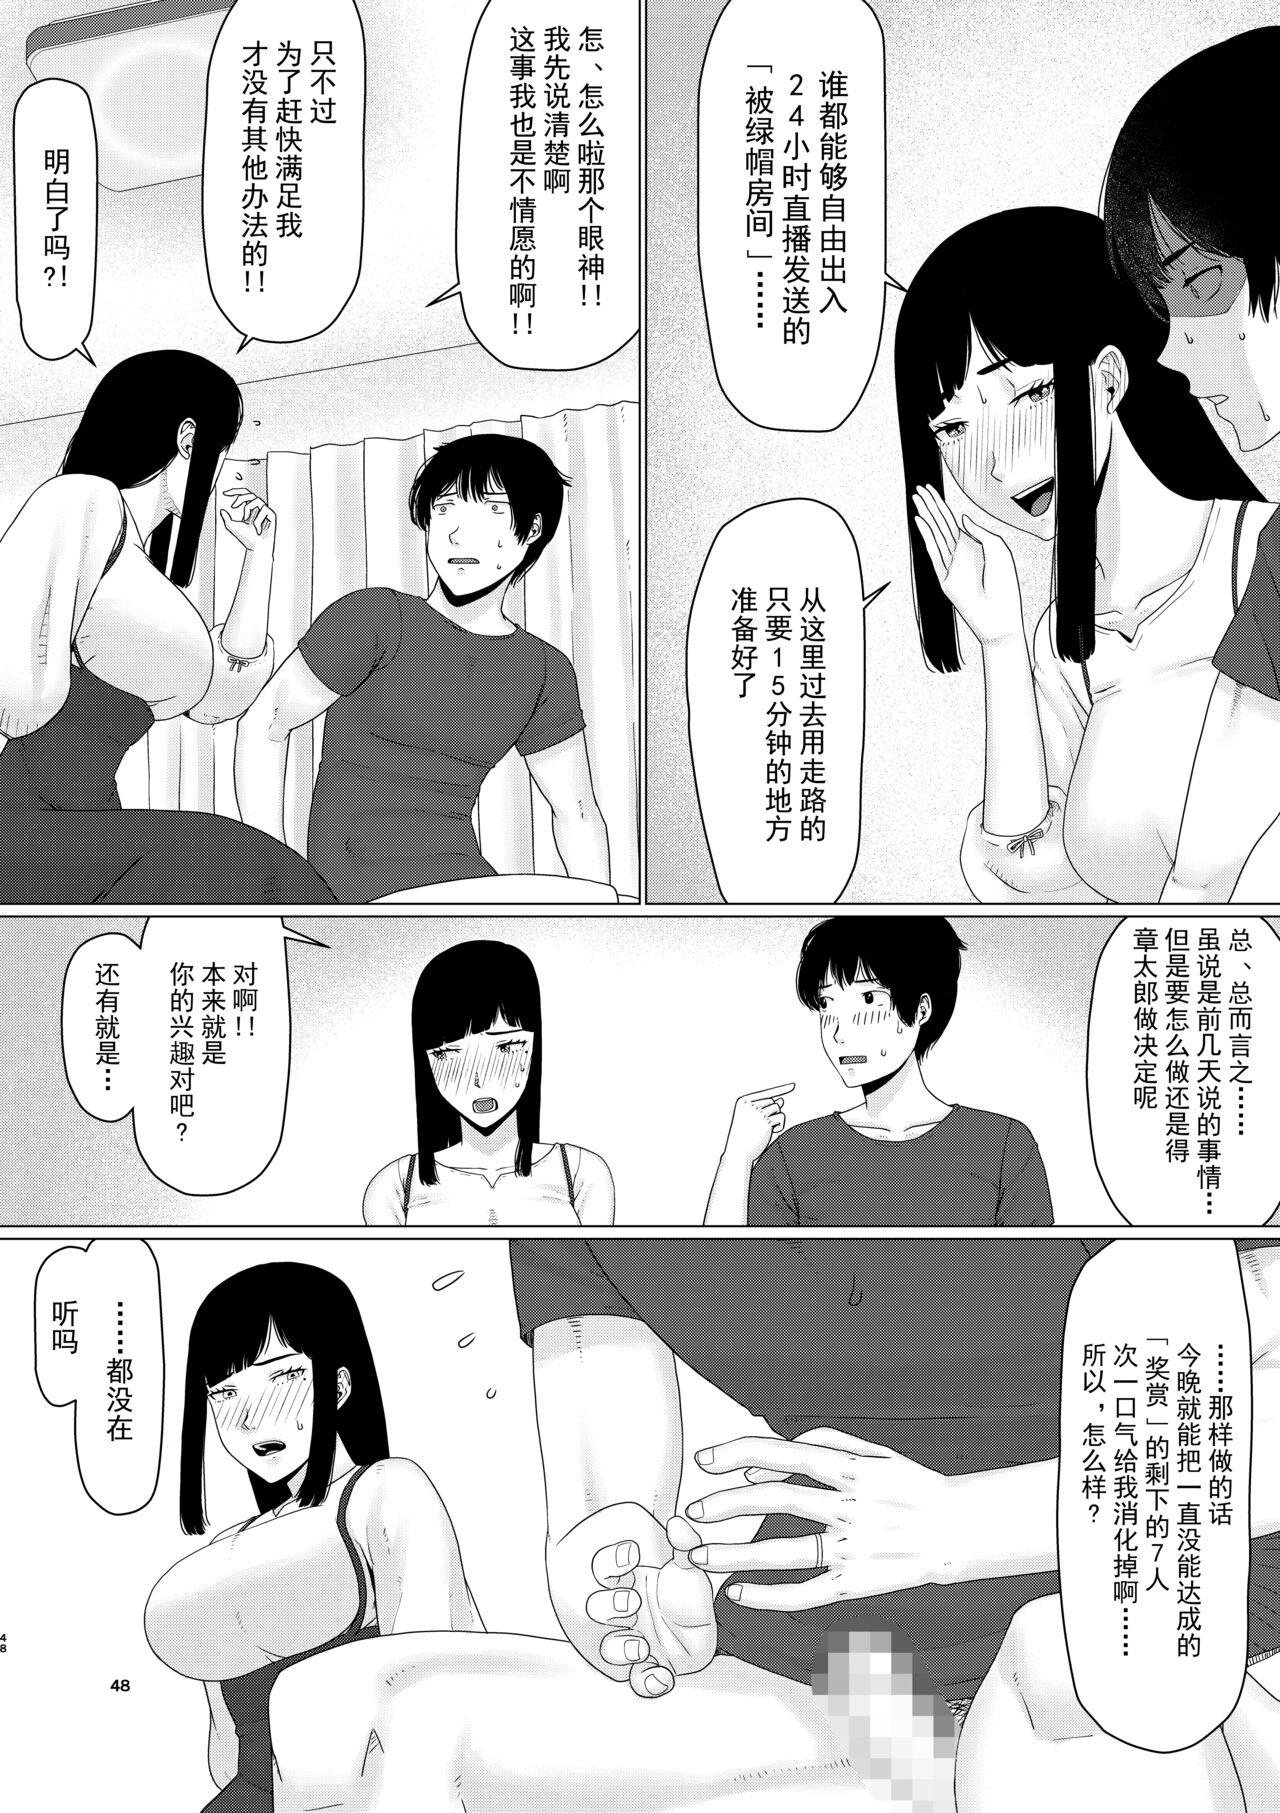 (Dōjinshi) Chieri can't lose!3 -Perverted toilet wife who fertilizes anyone's sperm with her husband's approval- Volume 1 (Original) [Chinese][超勇漢化組] 49